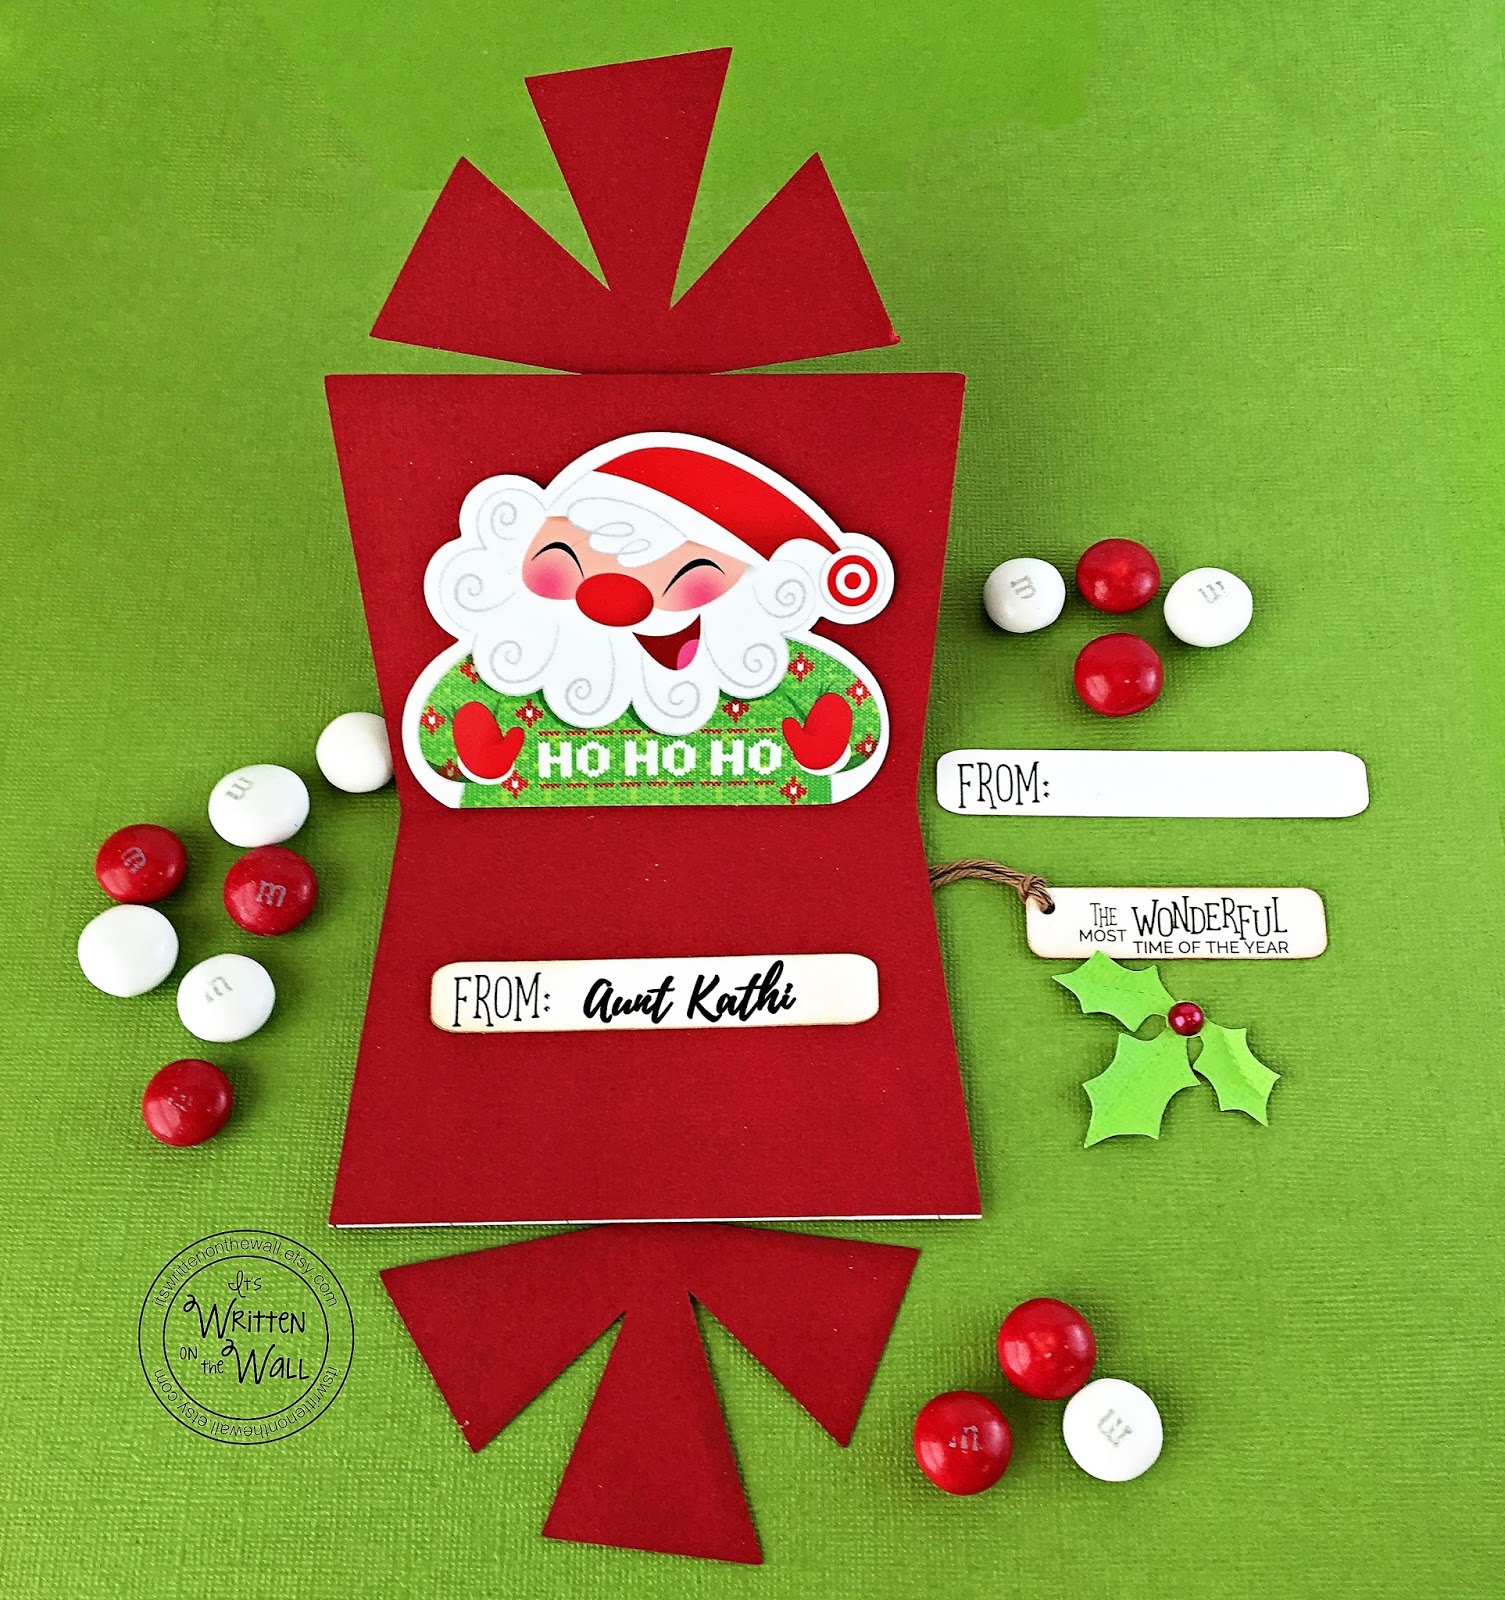 holiday gift cards